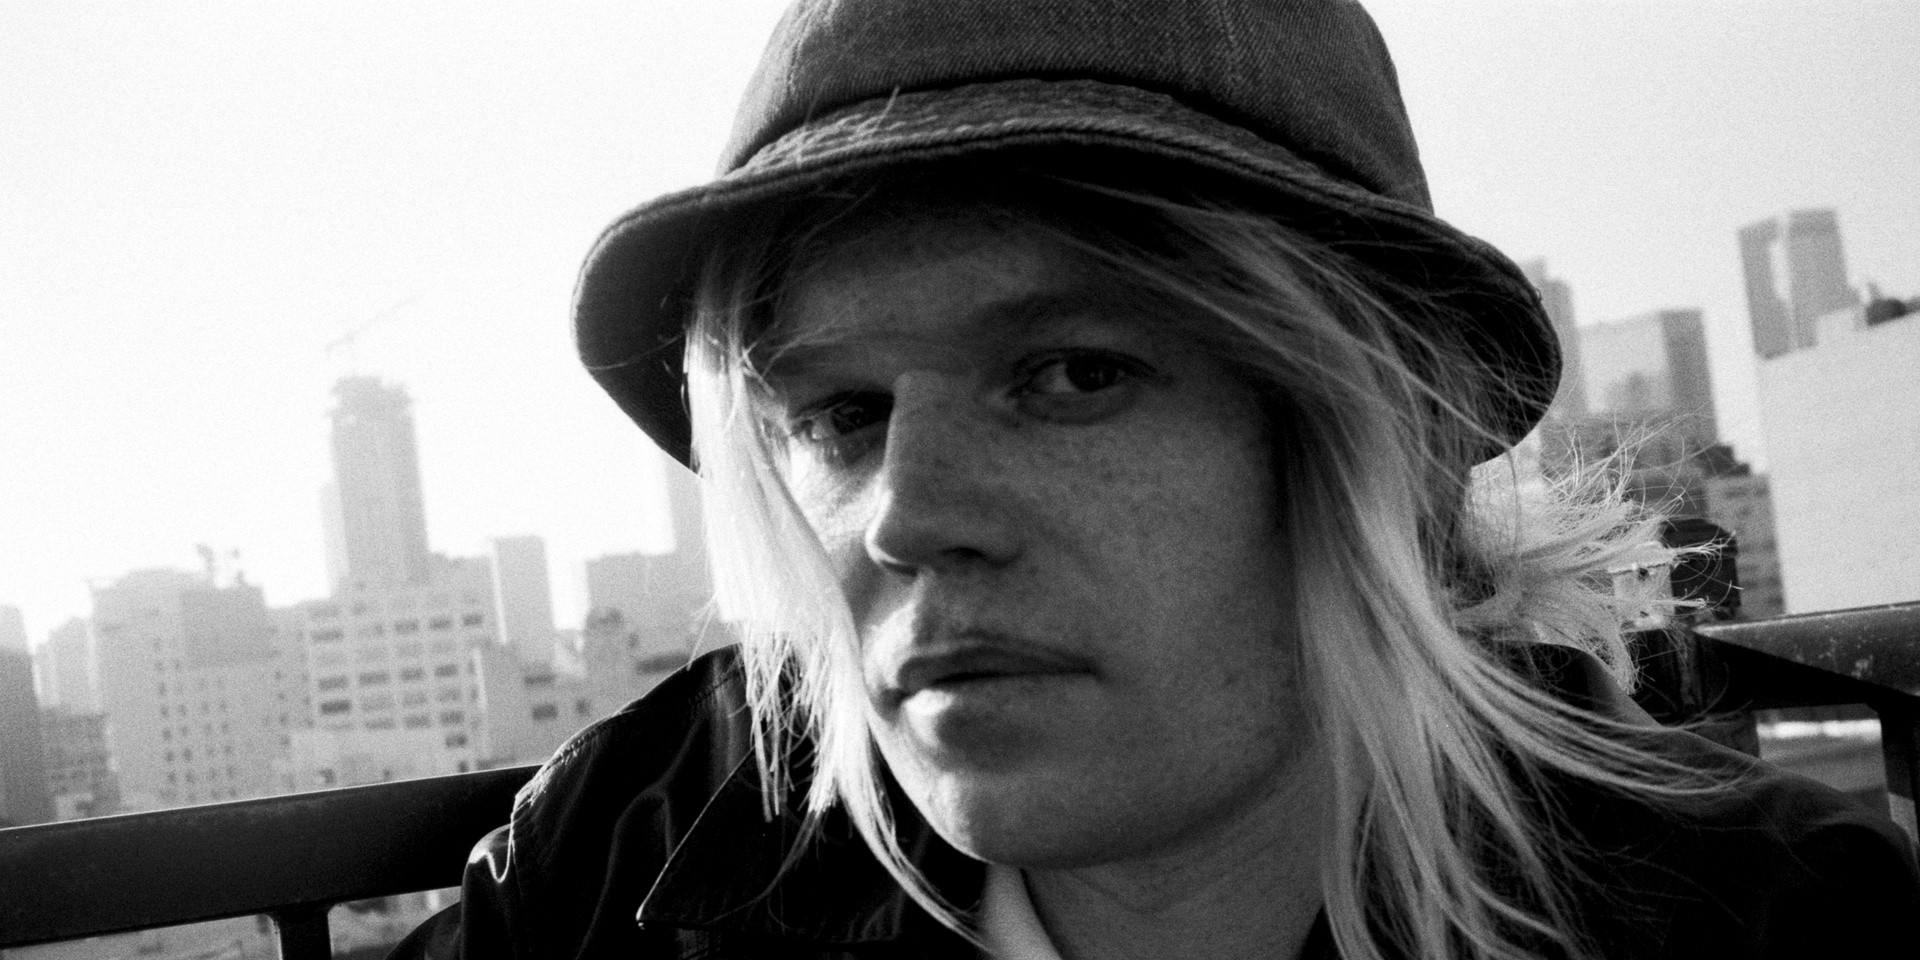 "When I start thinking, that's when it doesn't go good" – An interview with Connan Mockasin